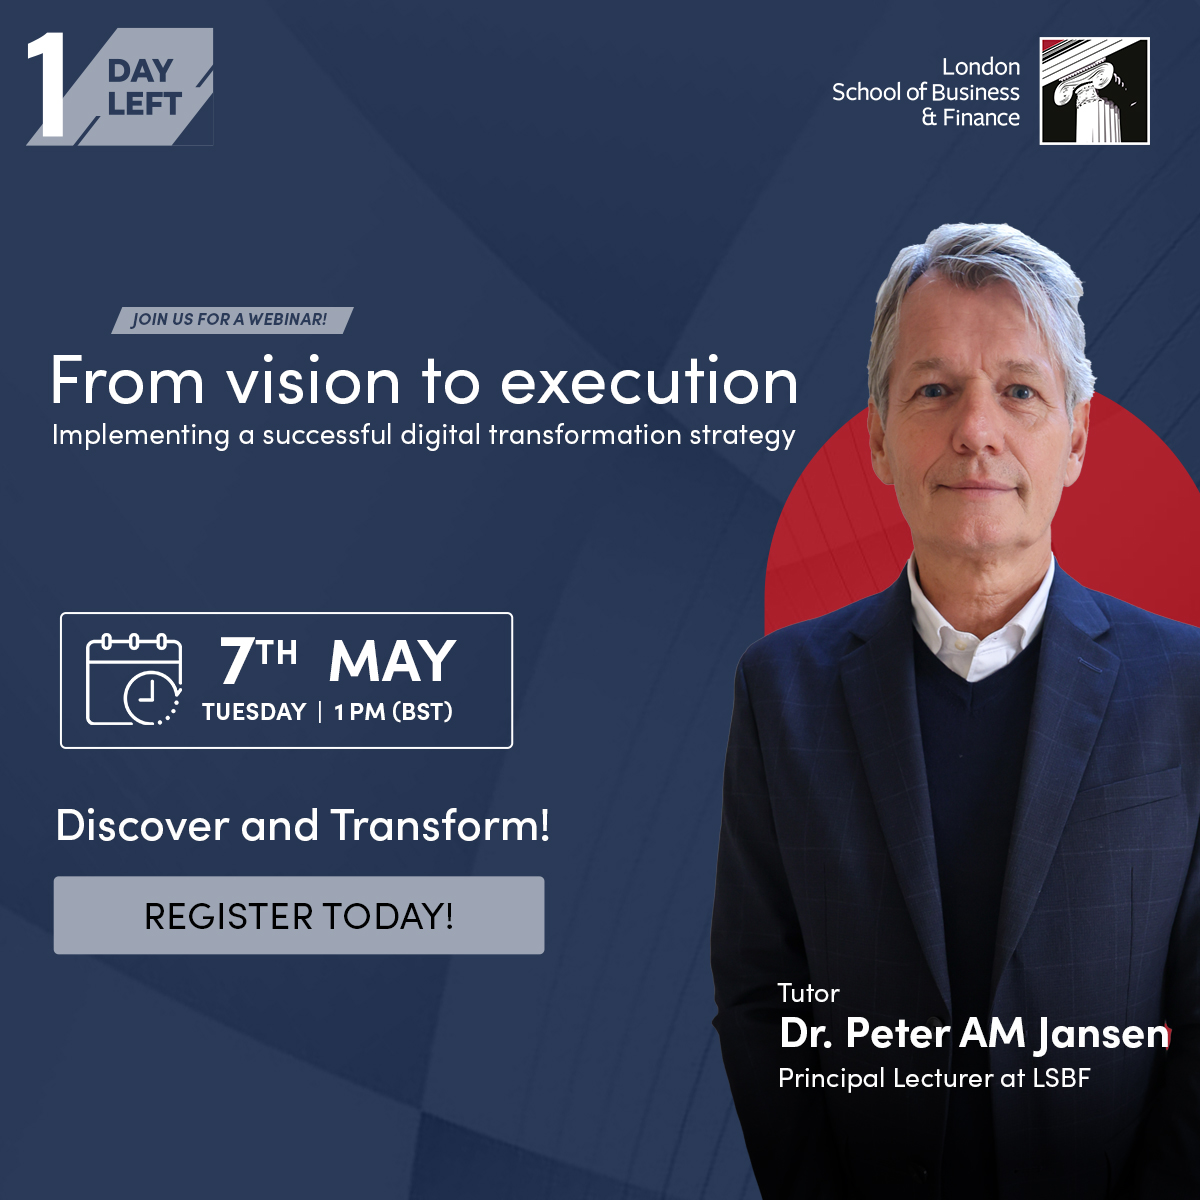 Only one day until our insightful webinar featuring Dr Peter Jansen! Don’t miss the chance to gain invaluable insights into digital transformation.

Secure your spot now and prepare to revolutionise your business approach!

attendee.gotowebinar.com/register/15676…

#LSBF #webinar #Freewebinar